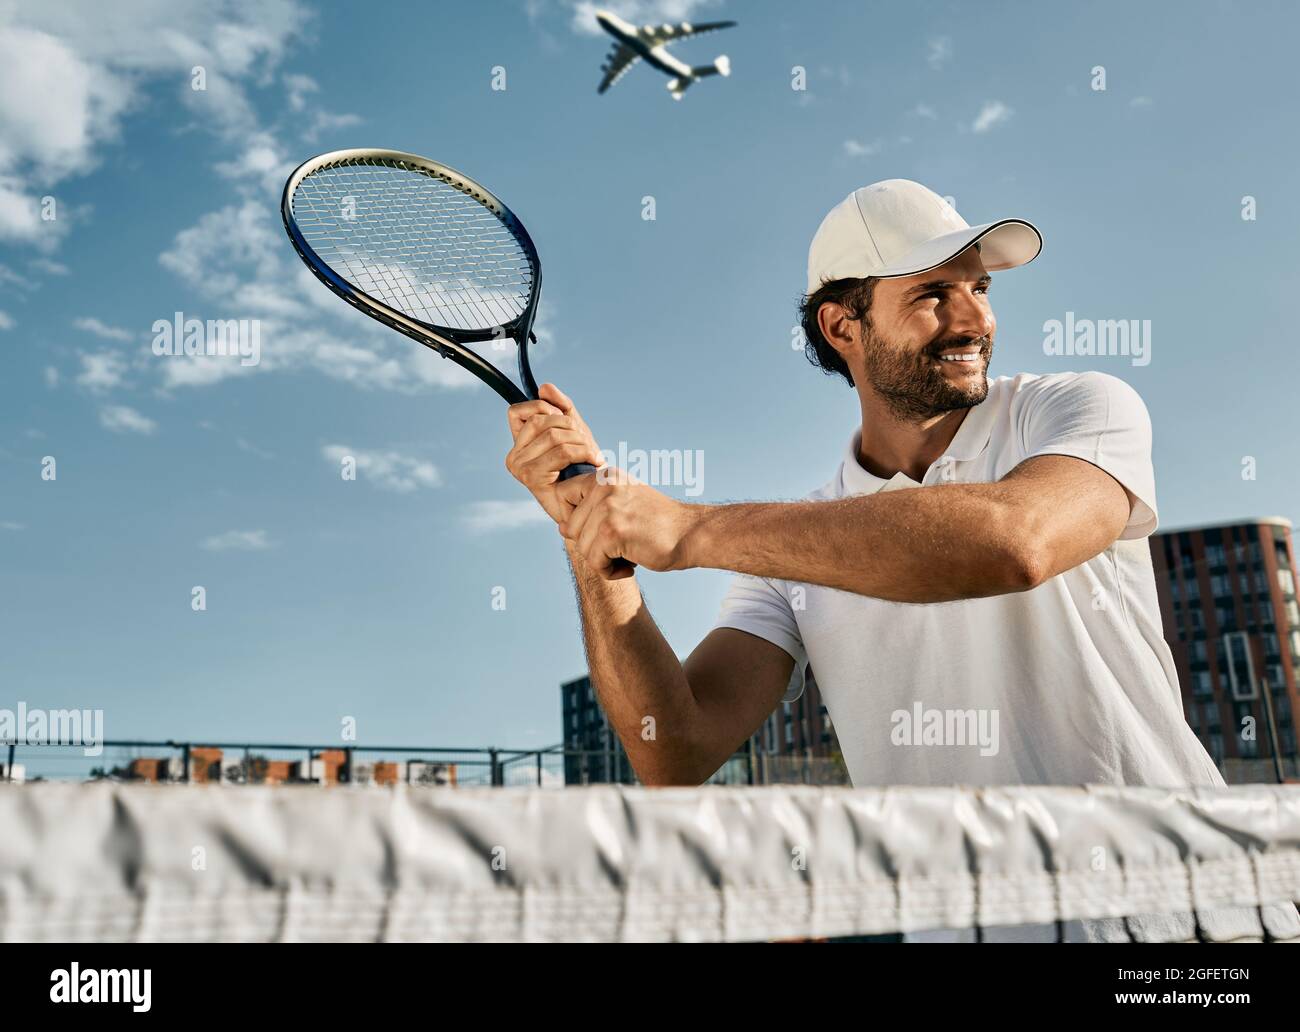 Handsome tennis player while match game with tennis racket in hands before shot over background of blue sky. Playing tennis game Stock Photo